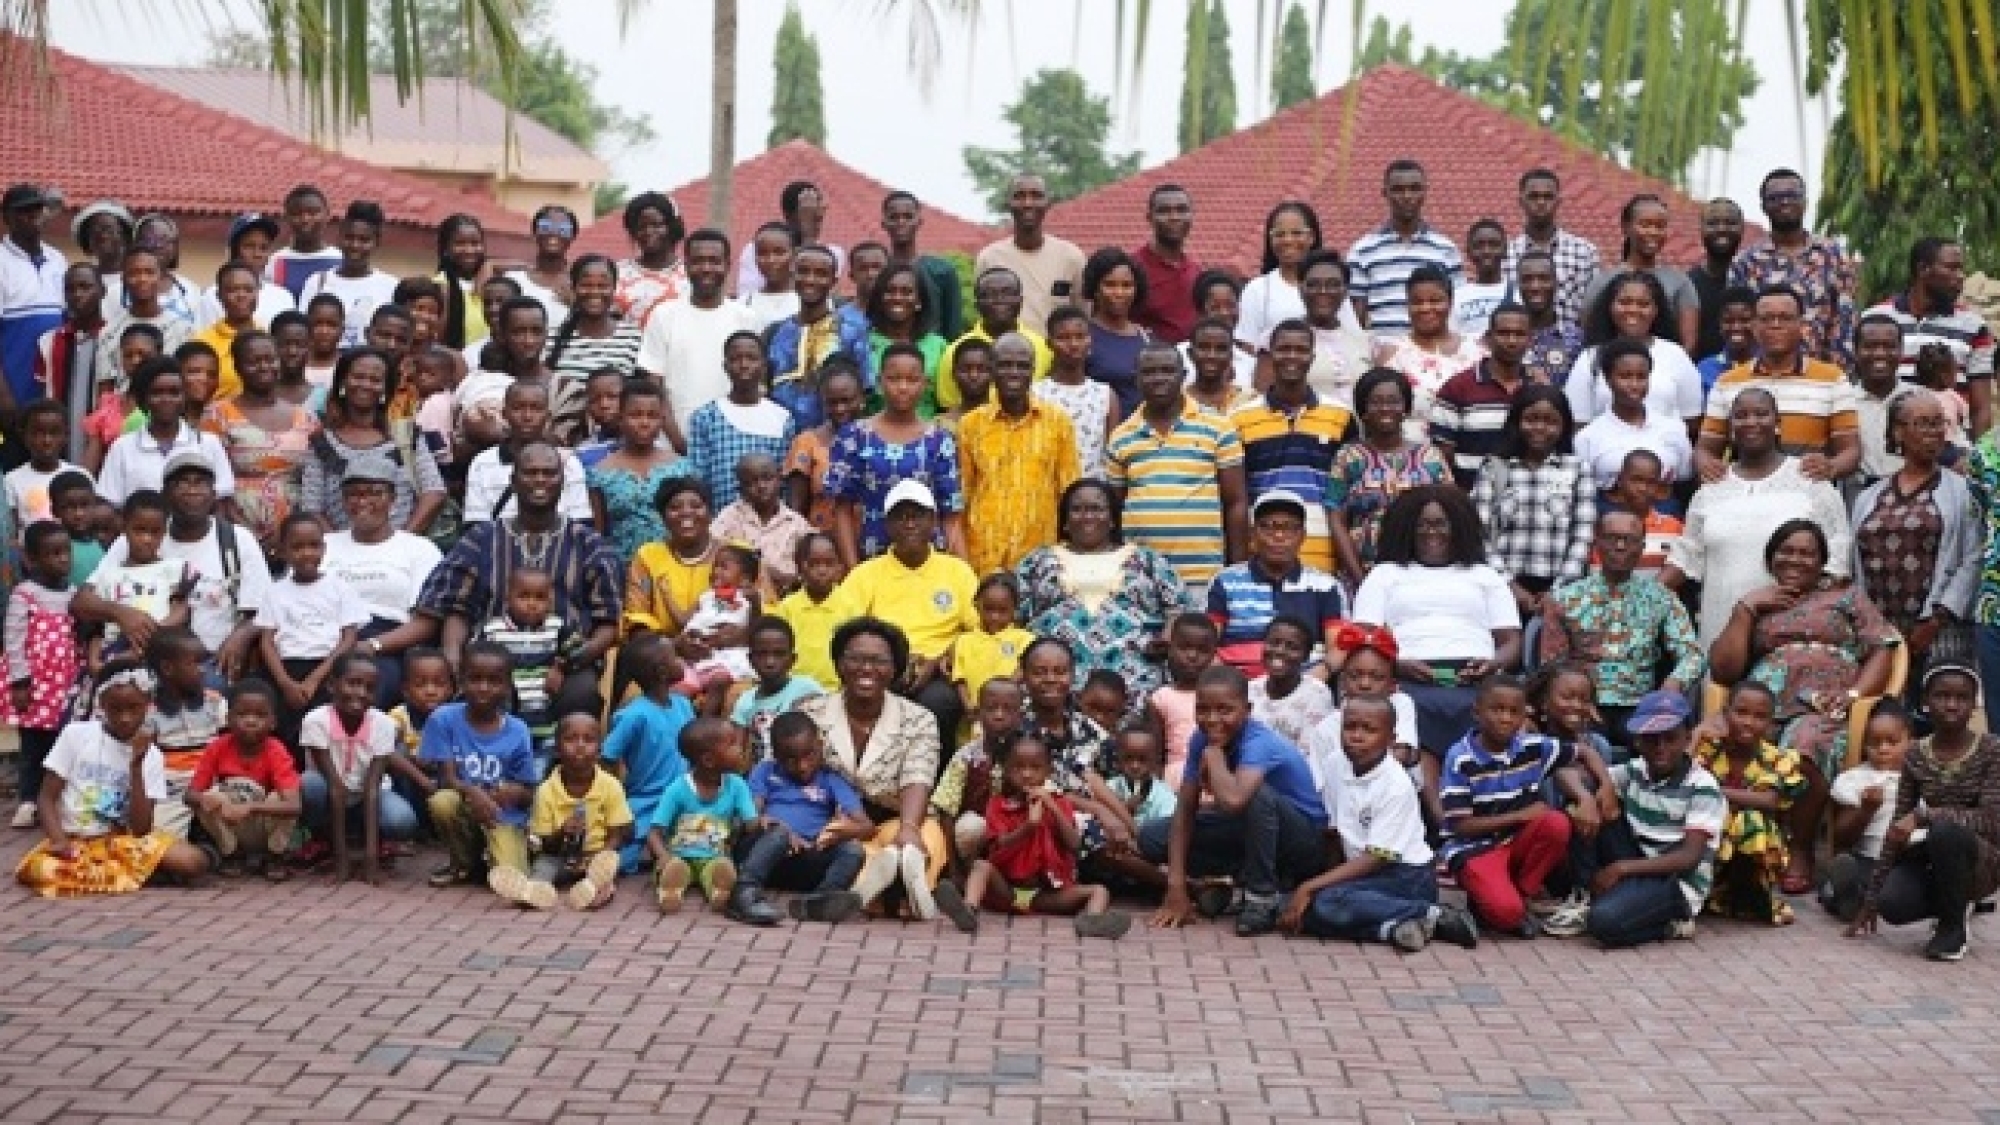 Know God And Have Eternal Walk With Him – Apostle Asare Tells Pastors’ Children